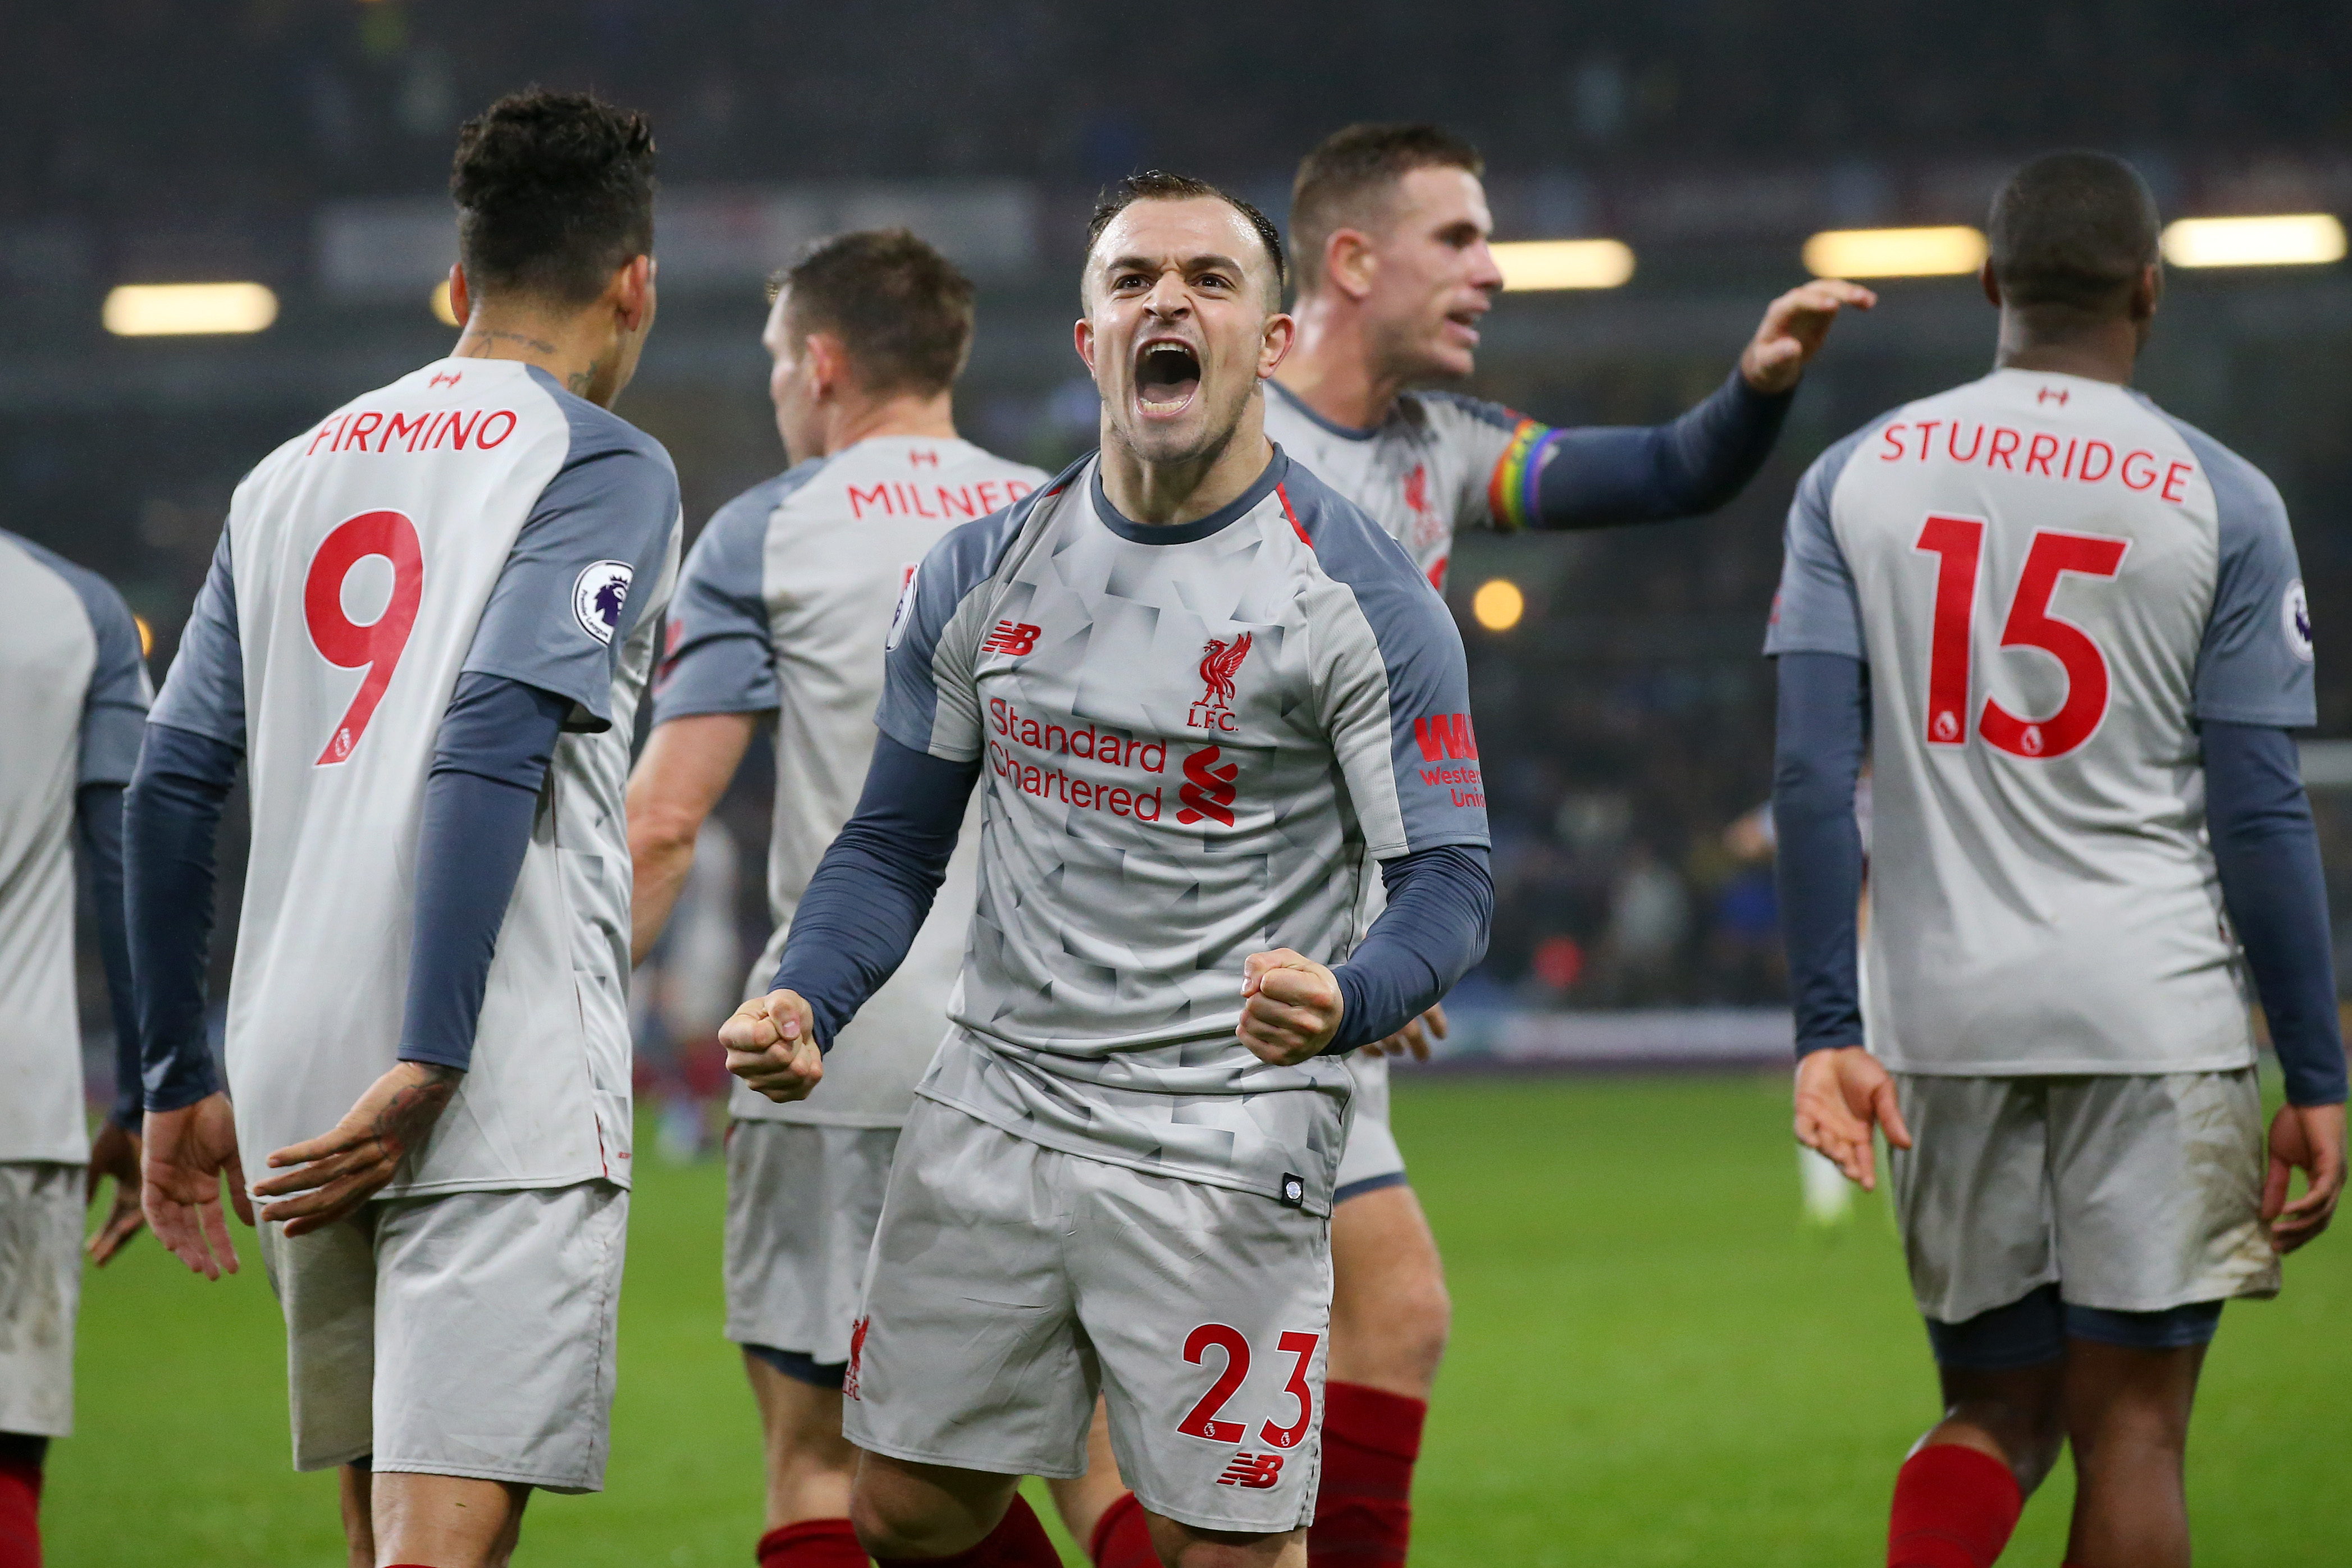 BURNLEY, ENGLAND - DECEMBER 05:  Xherdan Shaqiri of Liverpool celebrates after scoring his team's third goal during the Premier League match between Burnley FC and Liverpool FC at Turf Moor on December 5, 2018 in Burnley, United Kingdom.  (Photo by Alex Livesey/Getty Images)